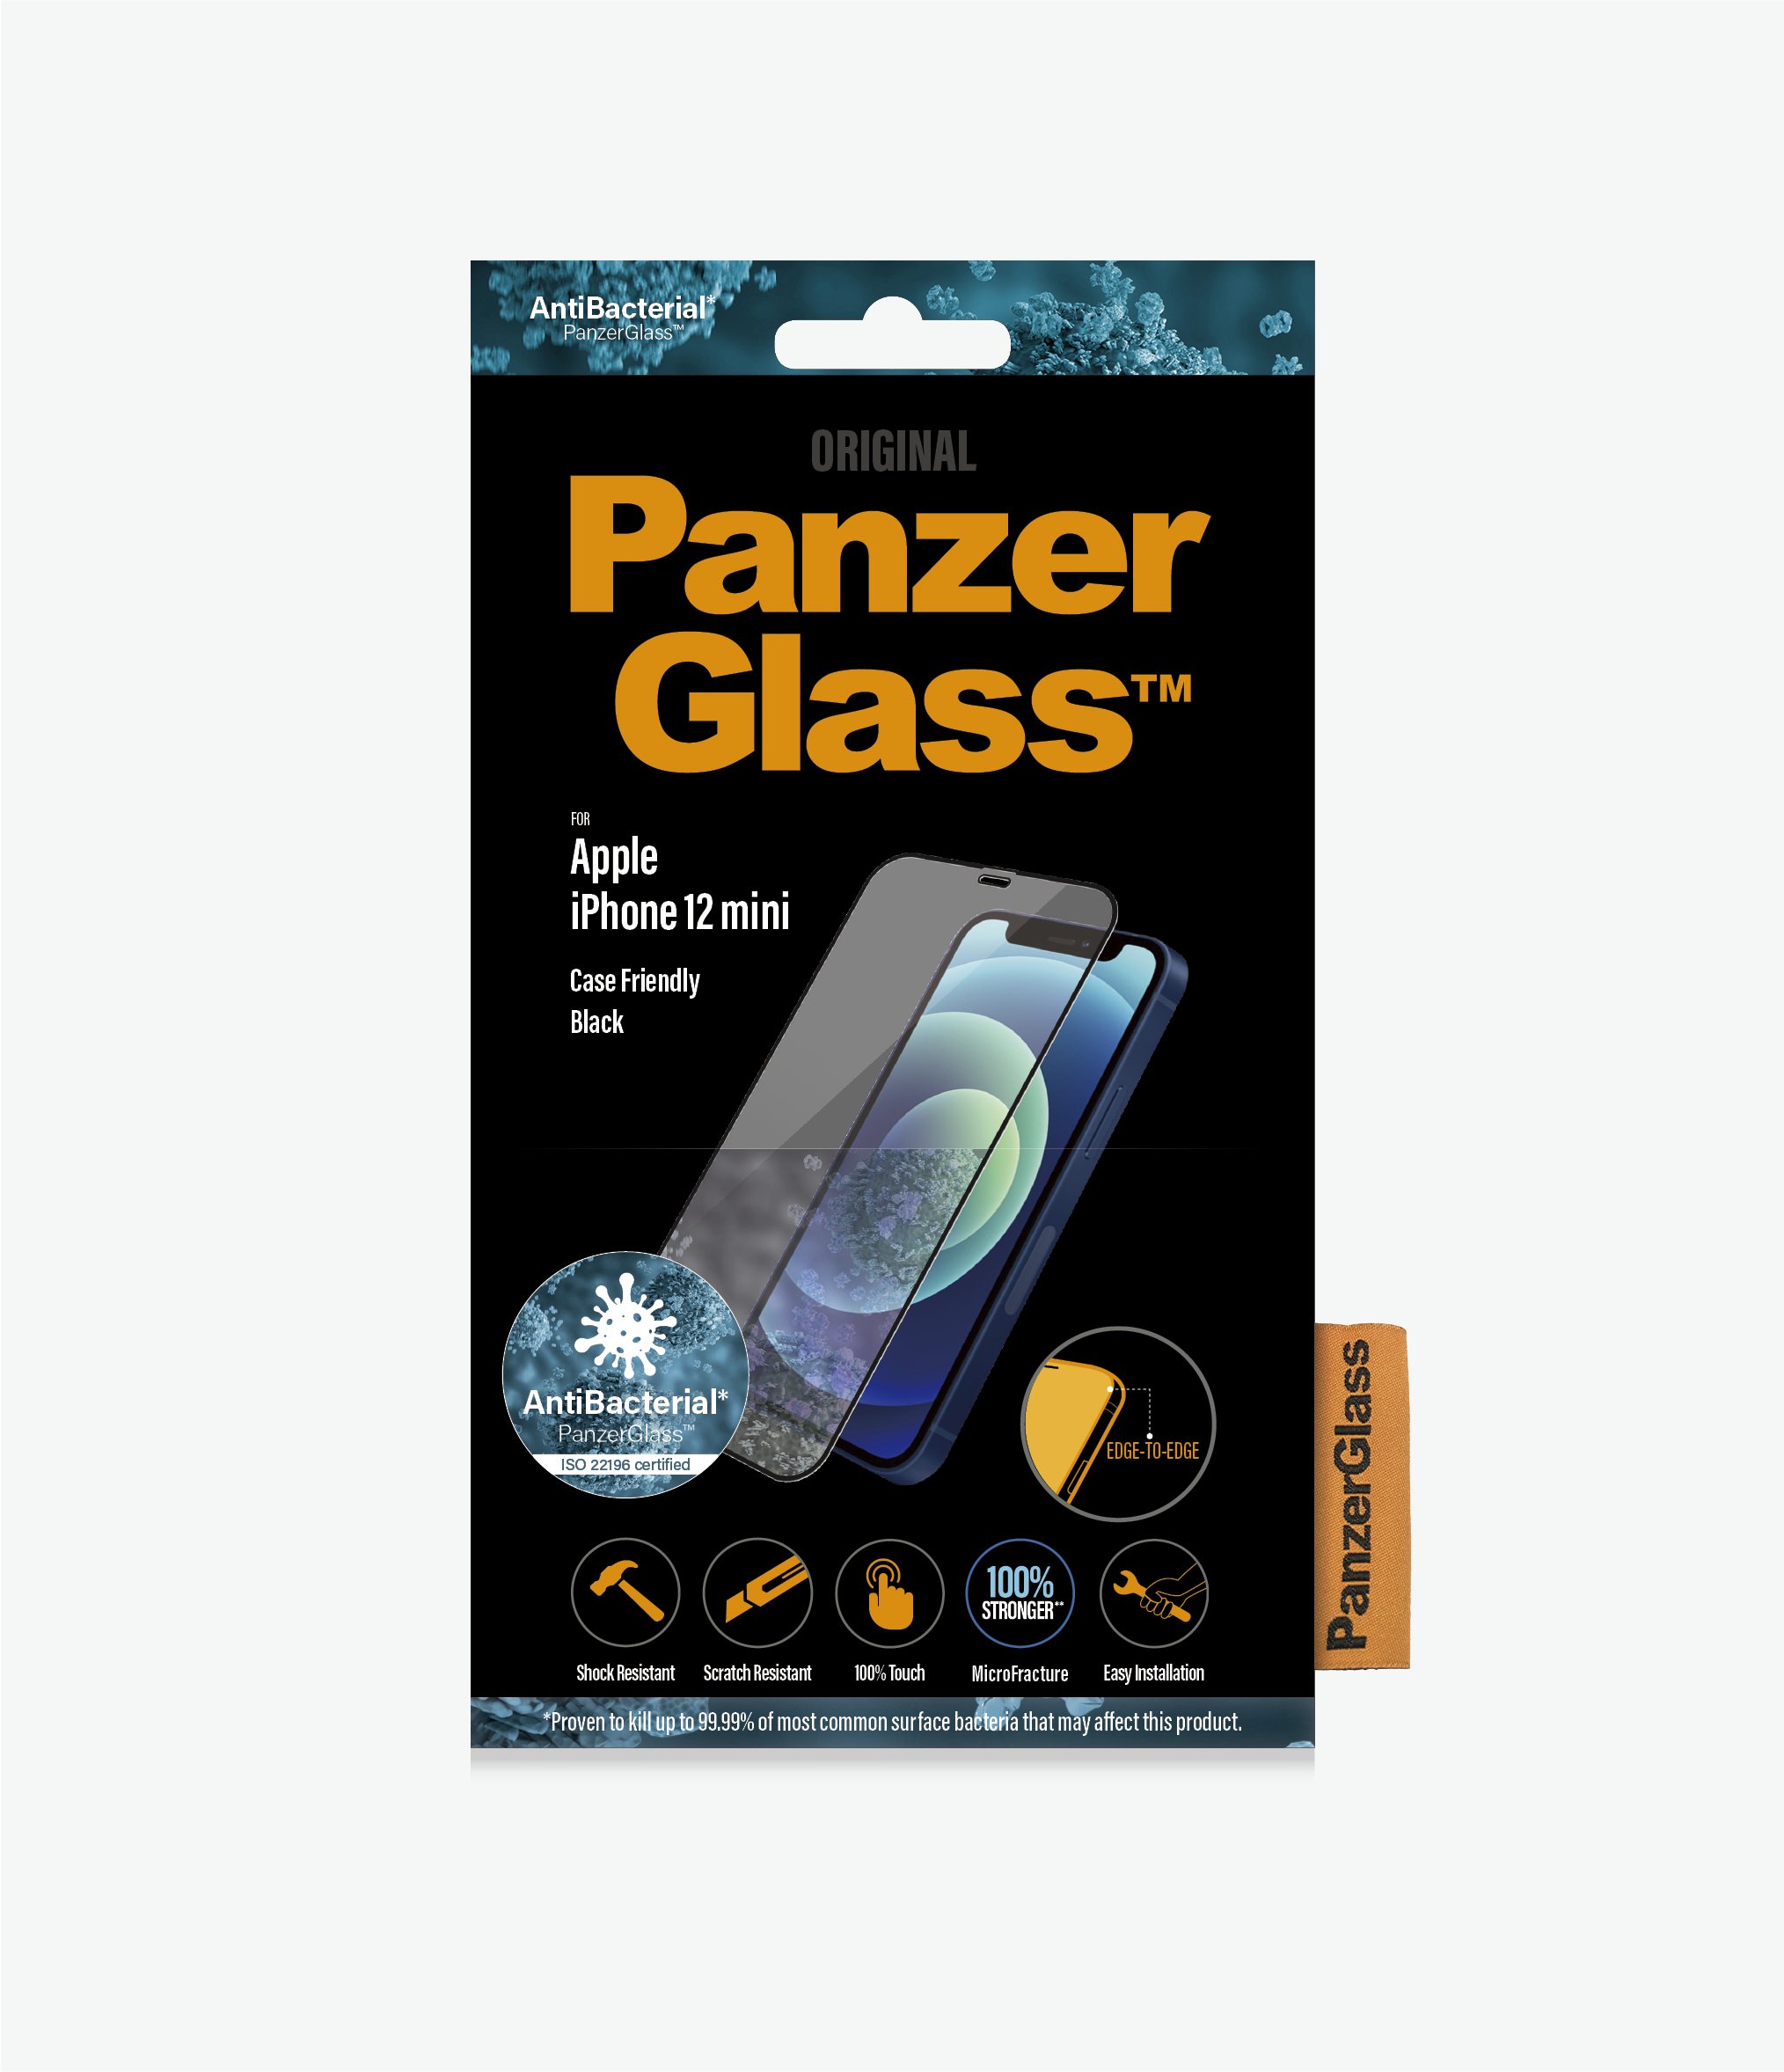 PanzerGlass™ Apple iPhone 12 Mini - Black (2710) - Screen Protector - Antibacterial glass, Protects the entire screen, Crystal clear, Shock absorbing